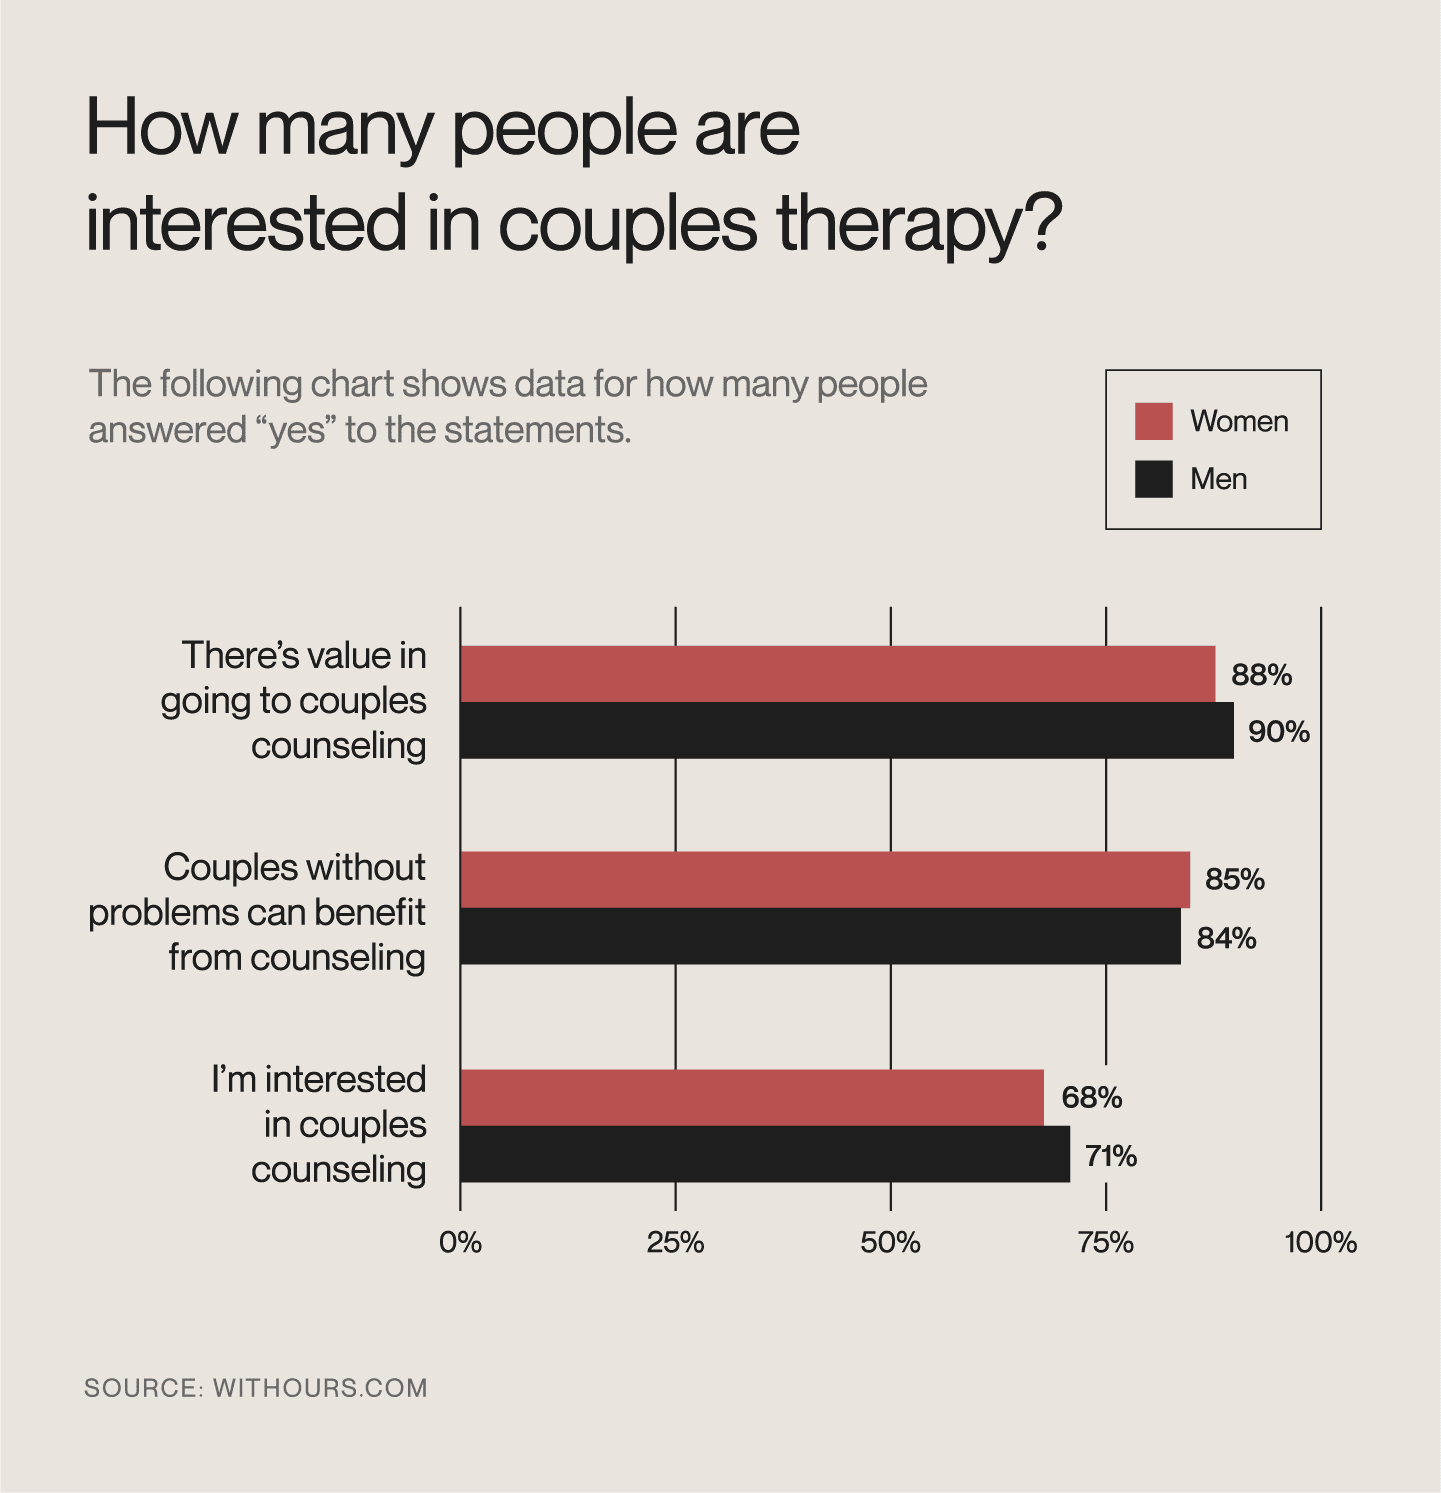 Statistics for how many people are interested in couples therapy.